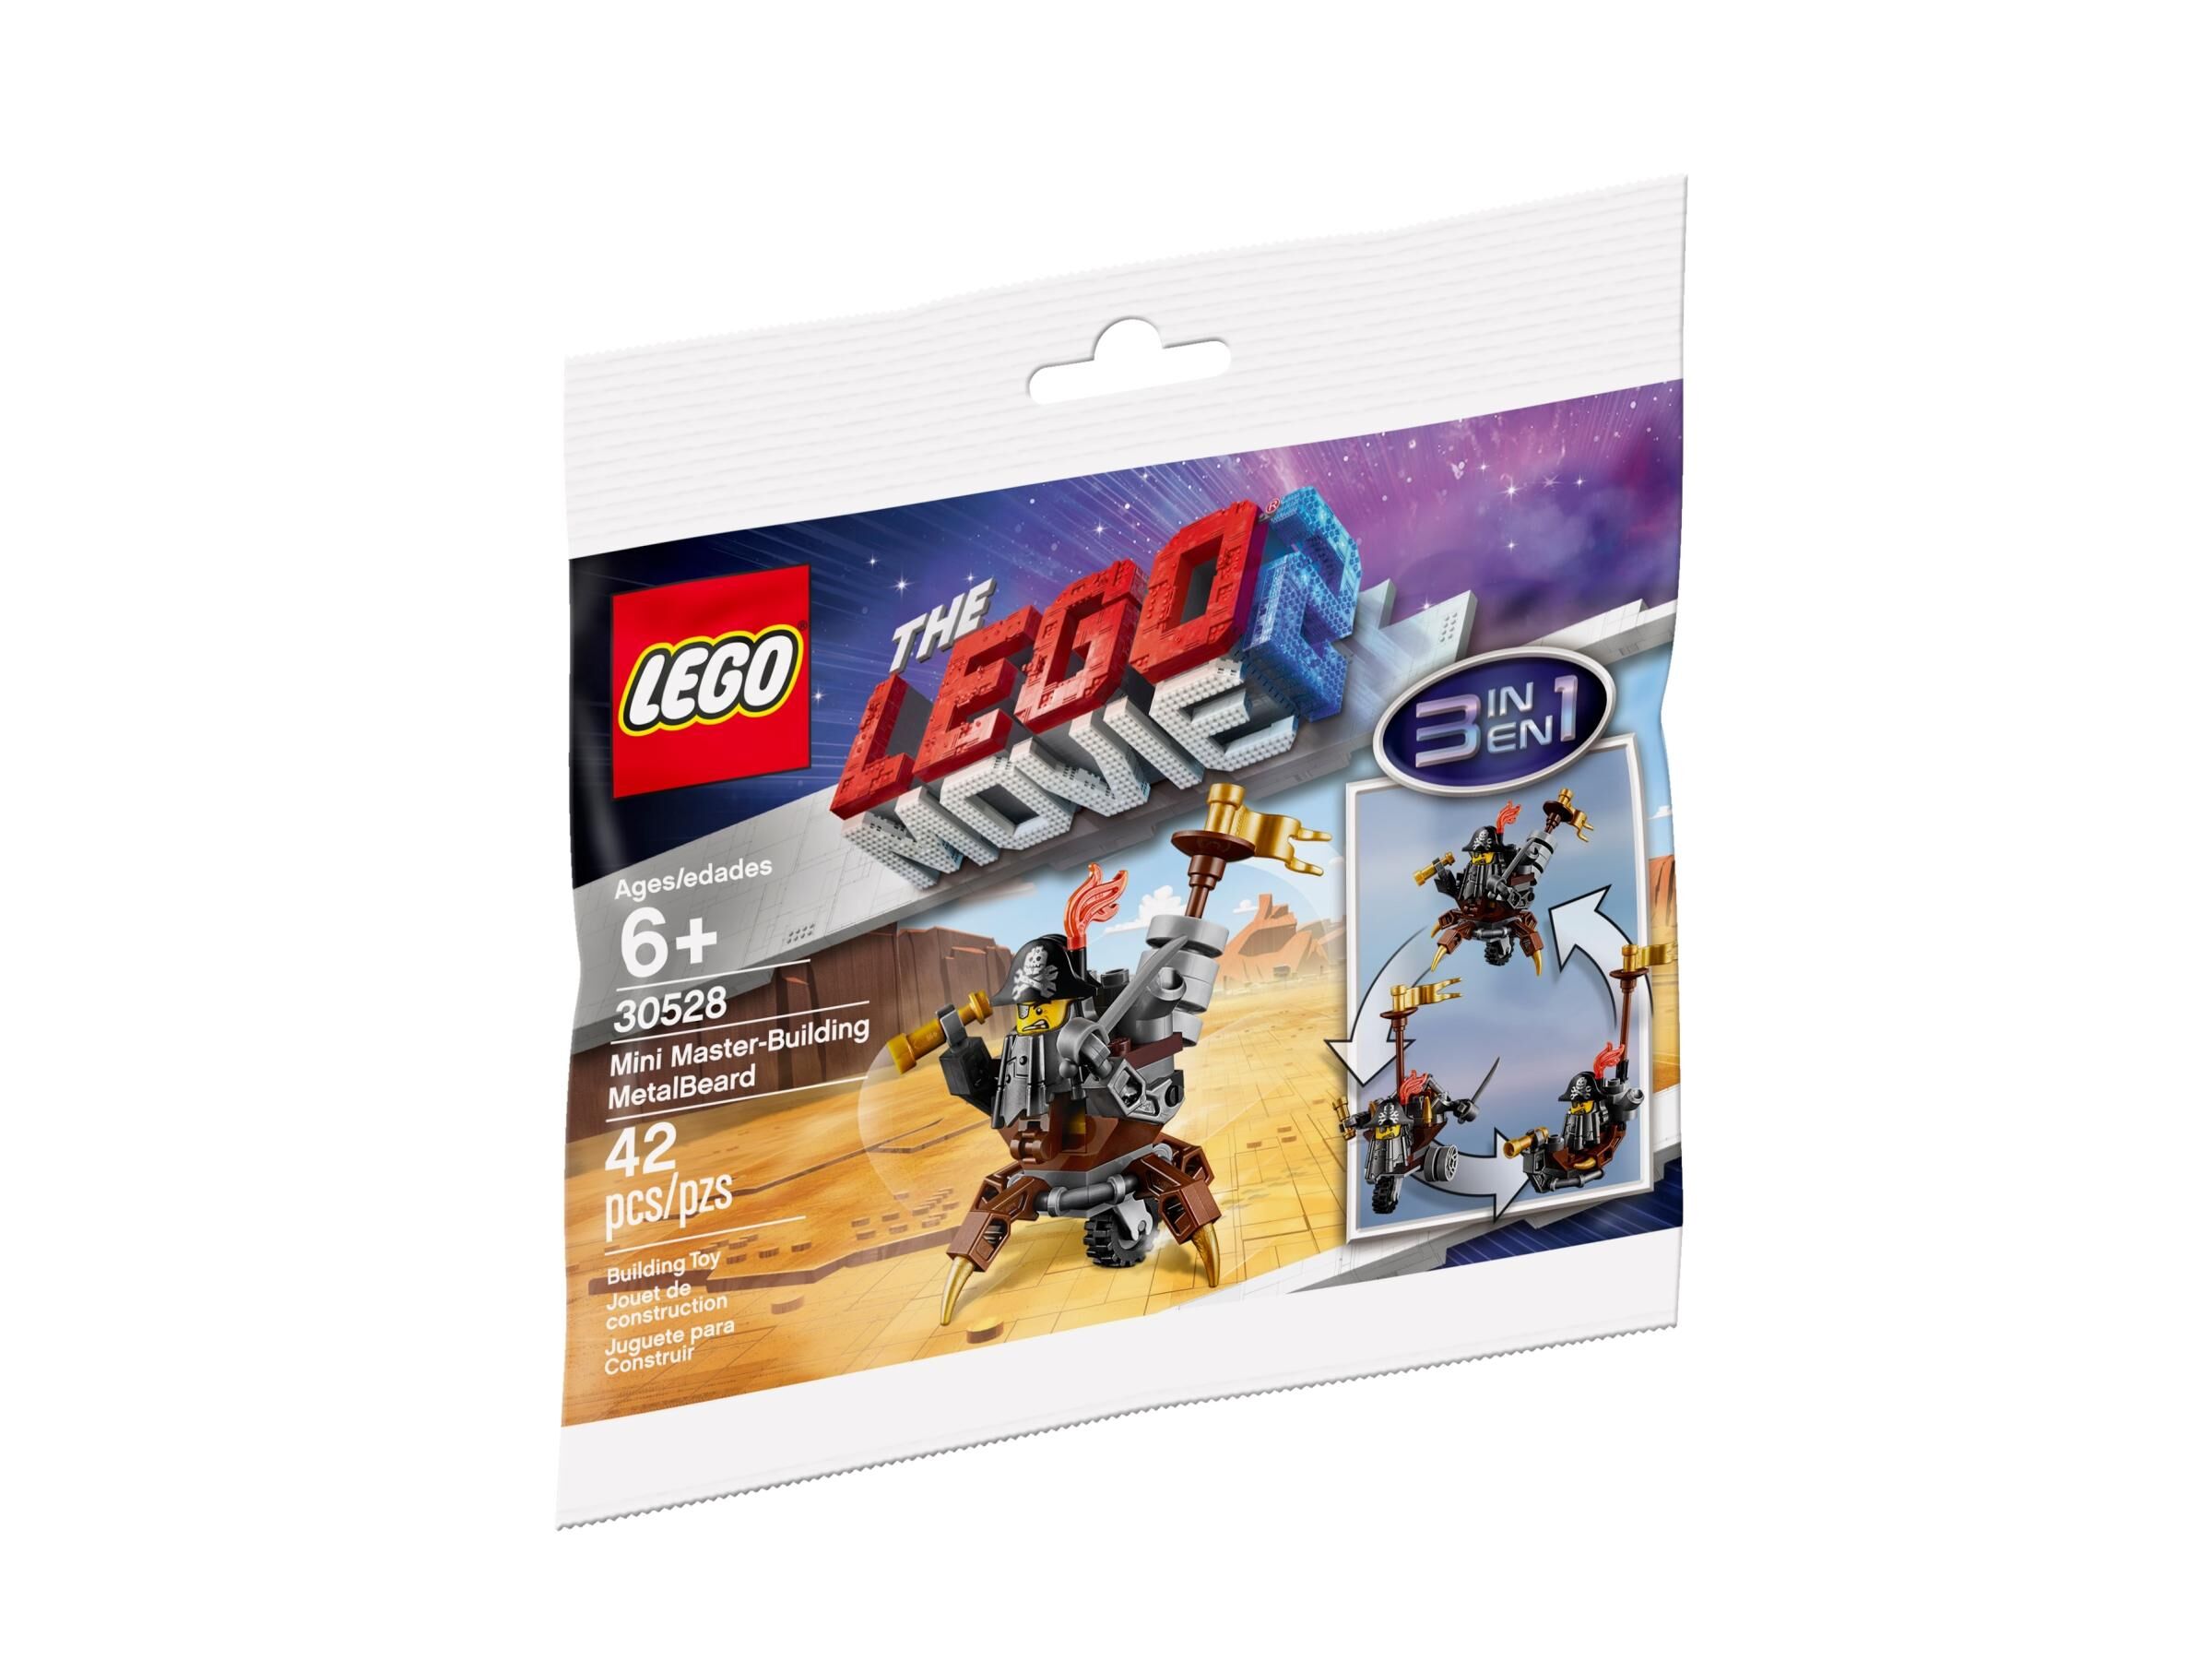 LEGO 30528 Mini Master-building MetalBeard Movie 2 3in1 Polybag for sale online 